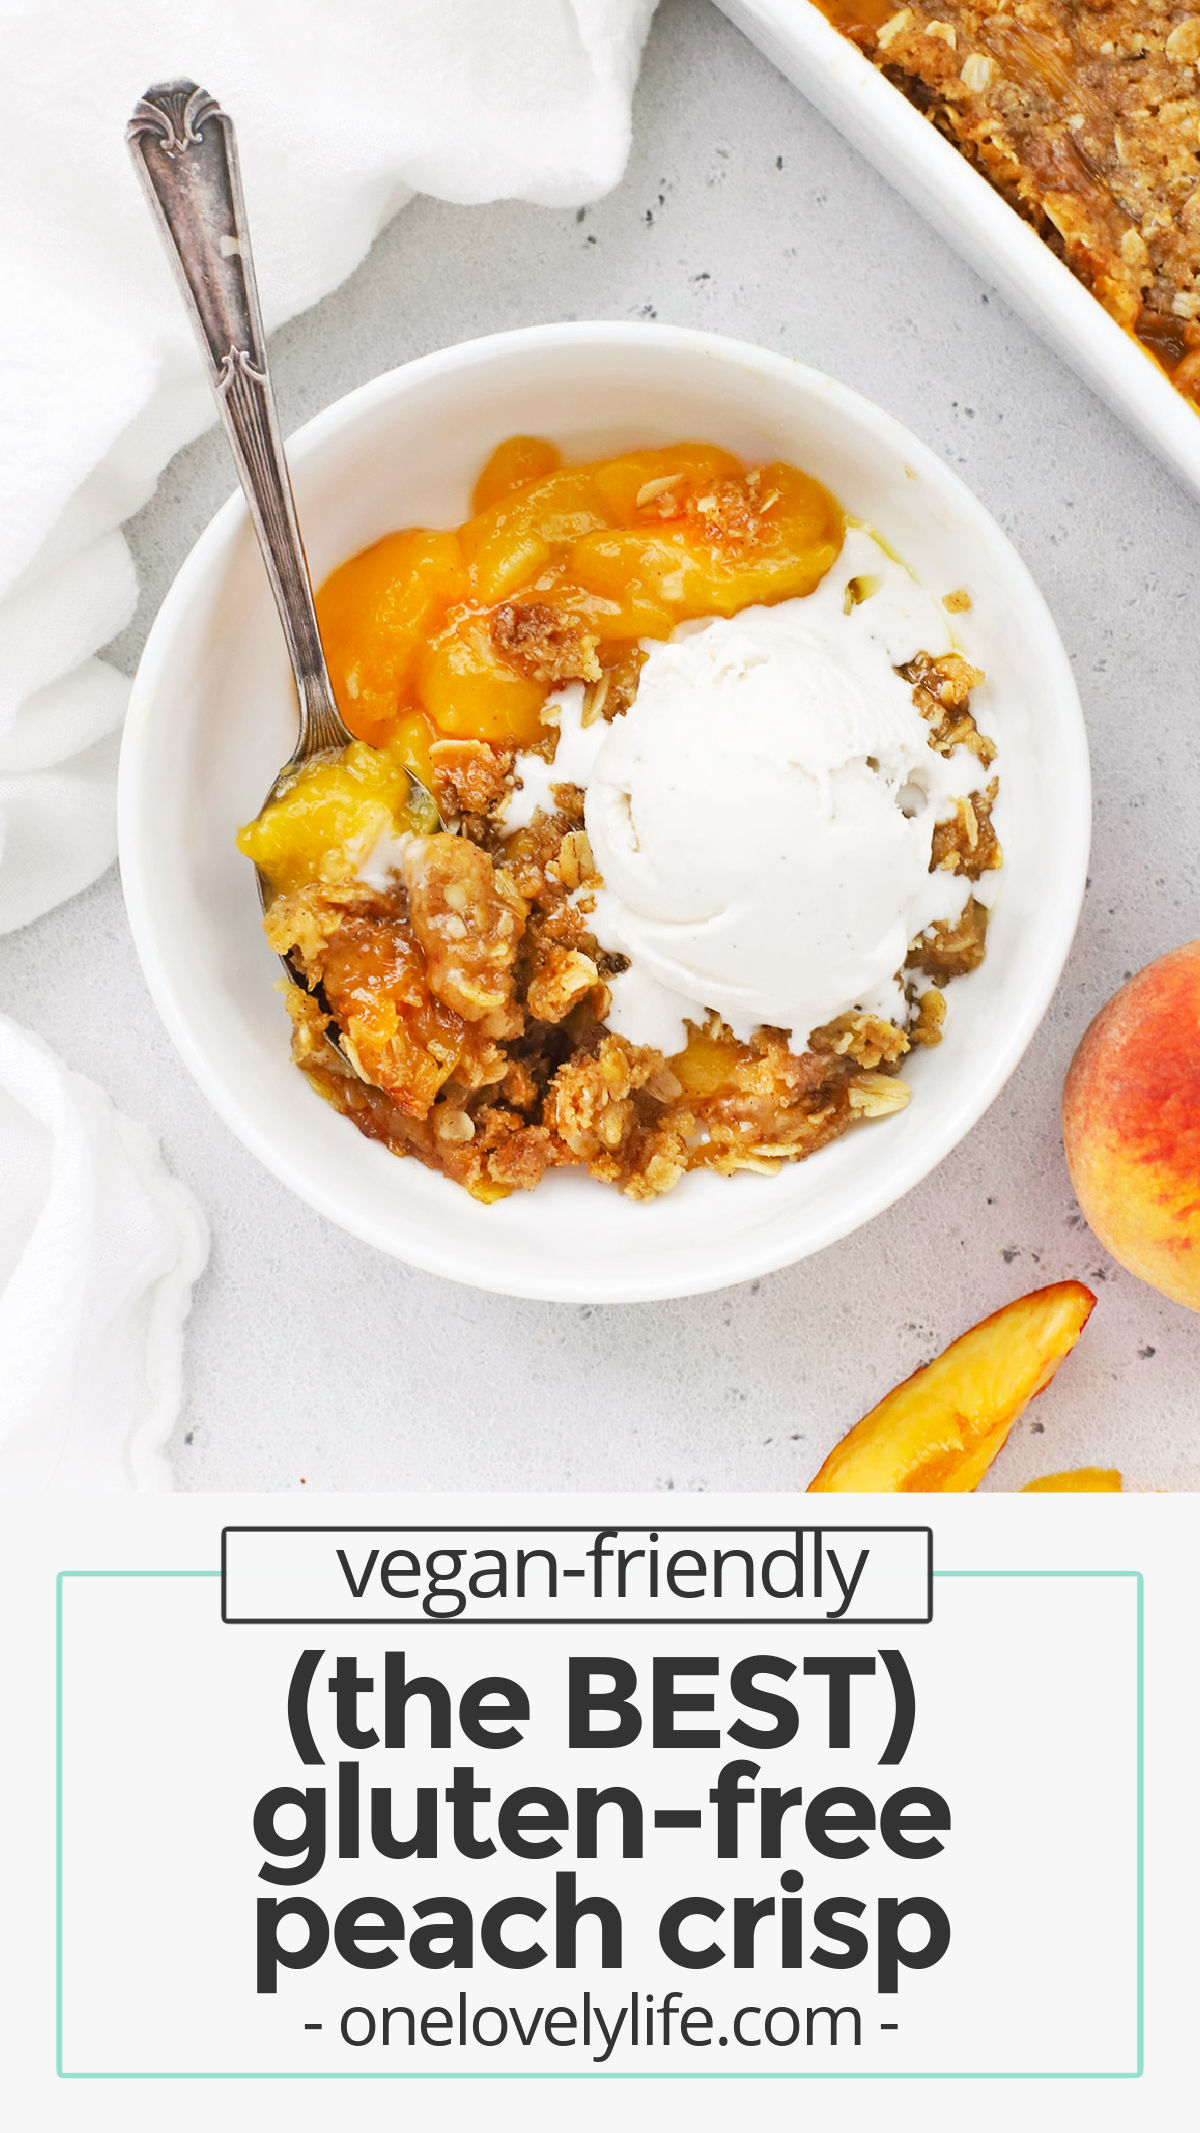 Gluten-Free Peach Crisp - This is the PERFECT peach crisp recipe! With sweet peach filling and a buttery crumble on top, it'll make all your summer dreams come true. (Dairy-Free + Vegan-Friendly) // Gluten Free Vegan Peach Crisp // The Best Peach Crisp Recipe // Gluten Free Peach Crisp Recipe // Summer Dessert // 4th of July // Peach Dessert // Gluten Free Peach Crumble